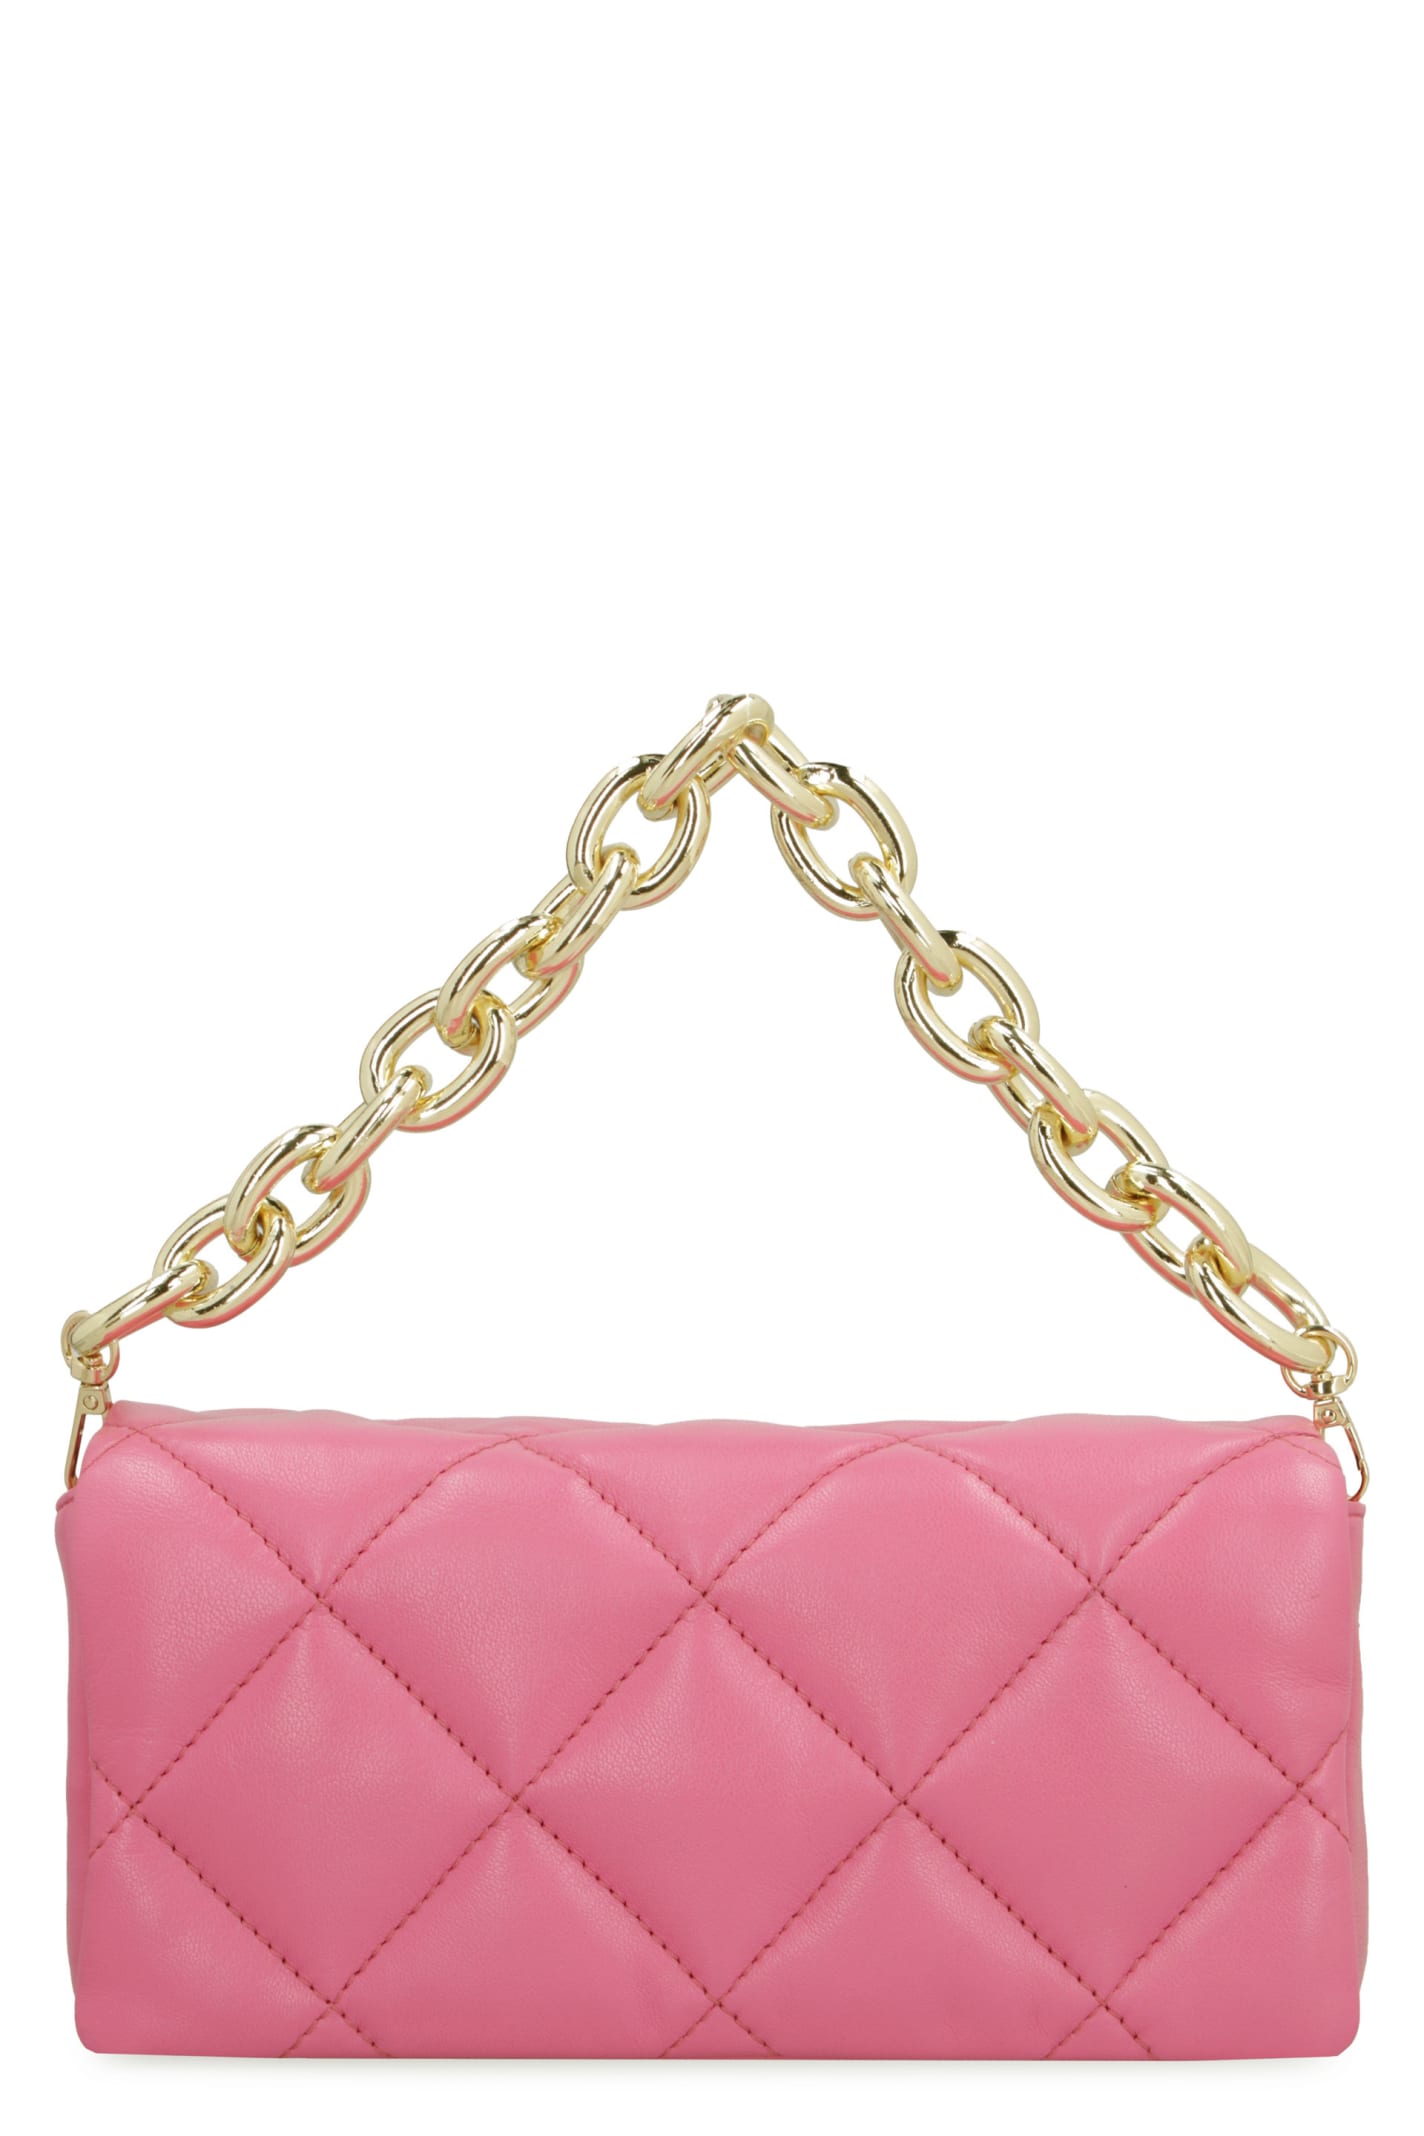 STAND STUDIO Hera Quilted Leather Bag